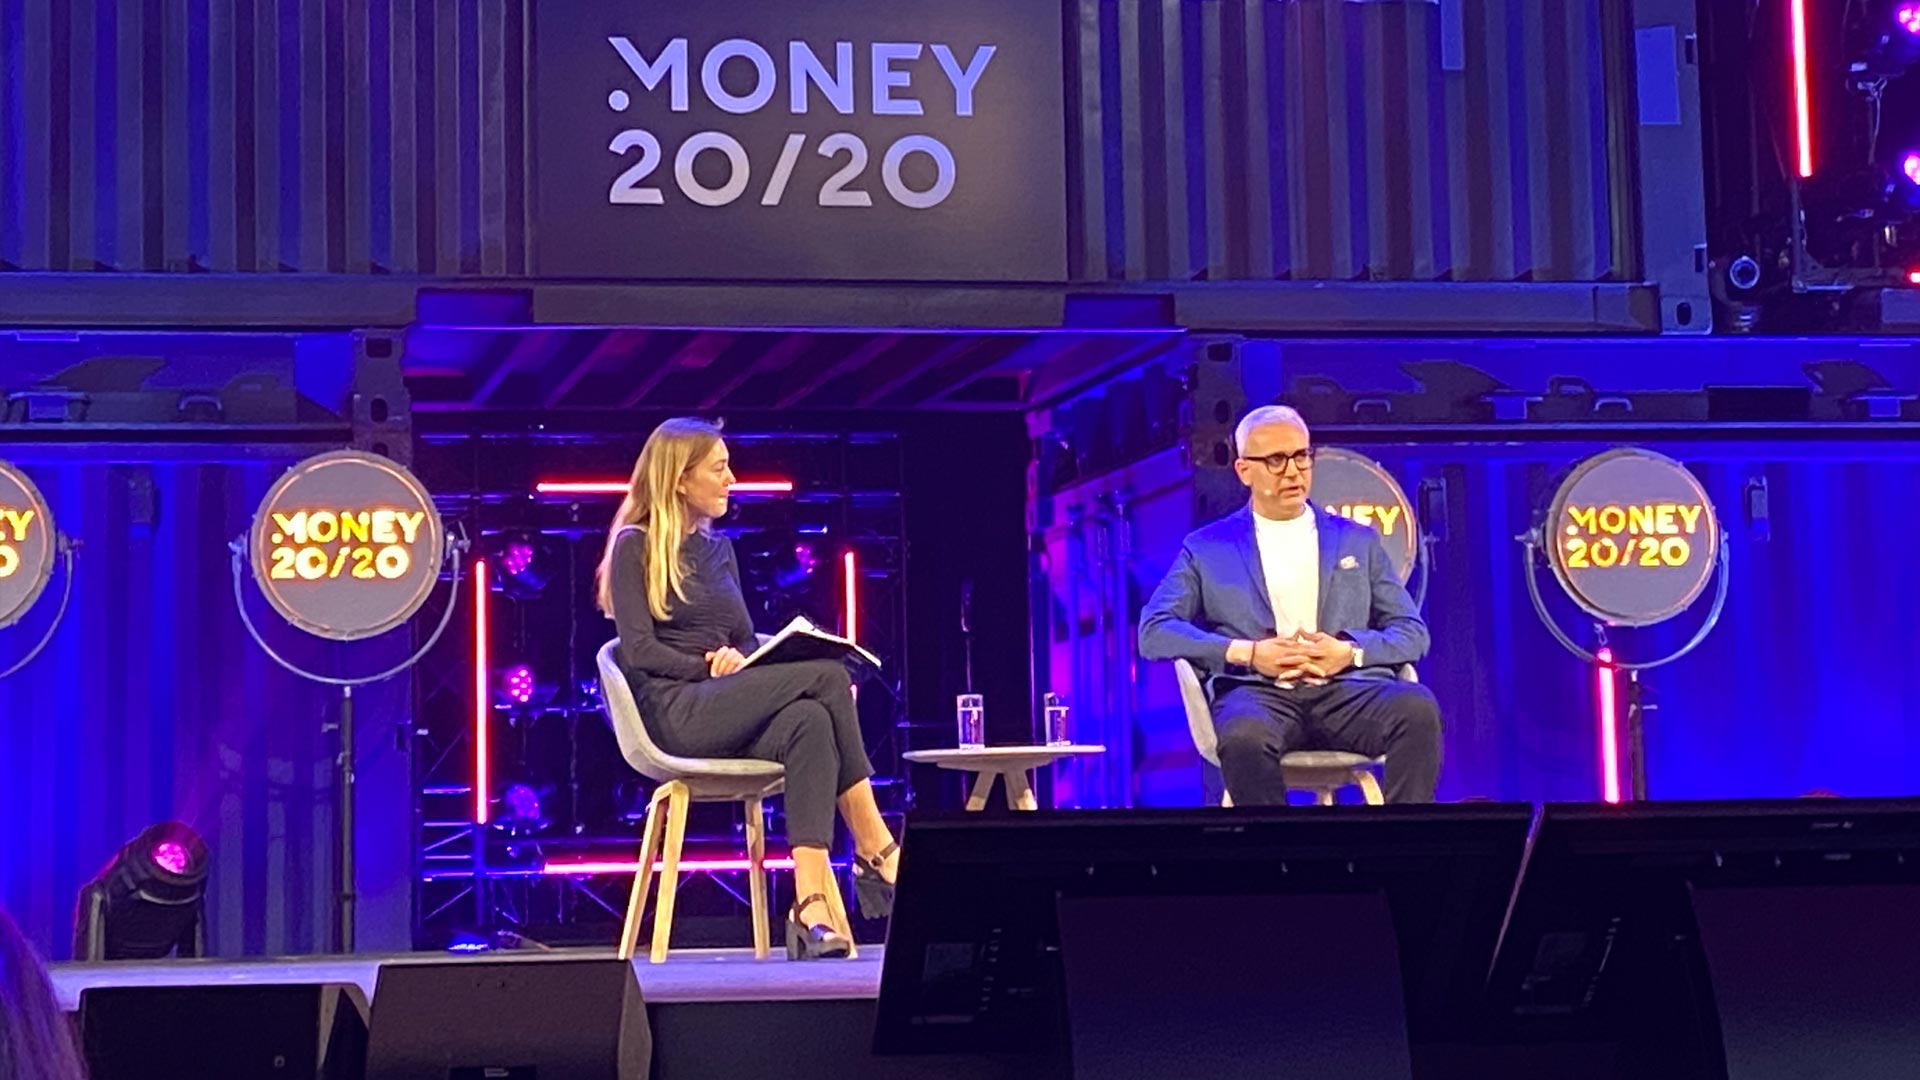 It’s a wrap: AI and financial exclusion are key themes at thought provoking Money20/20